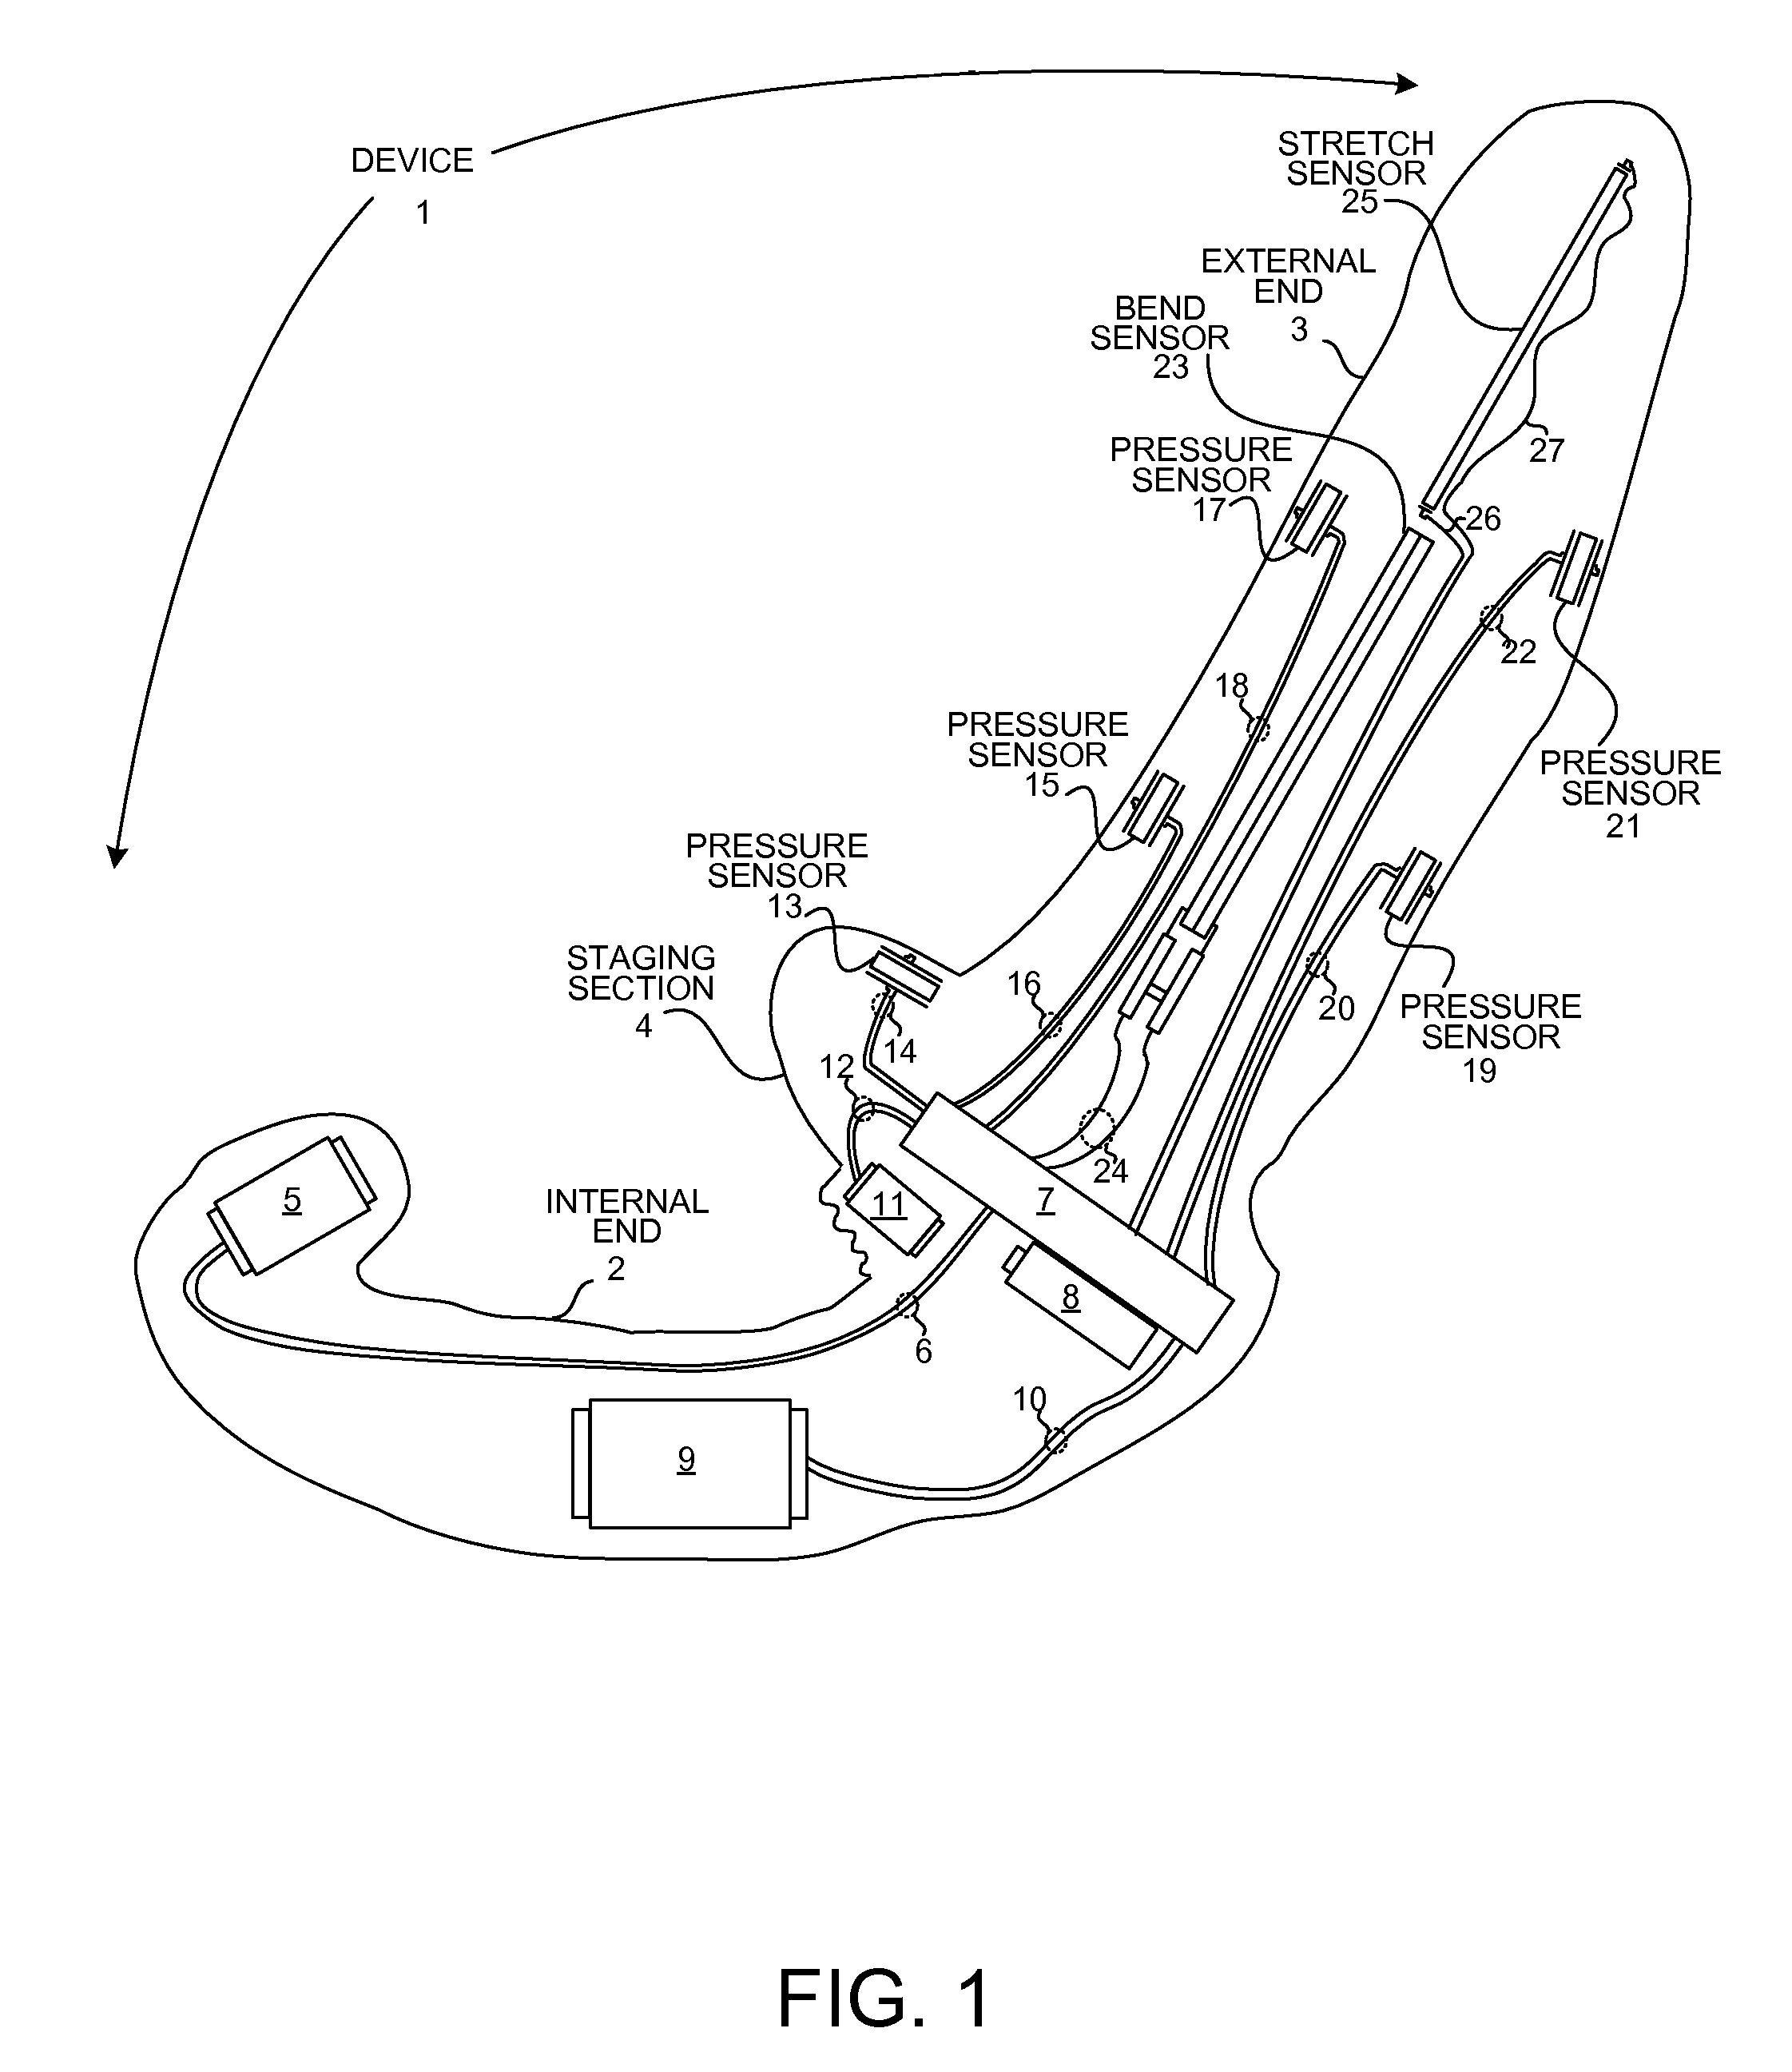 Cybernetic vibrator device with sensors for in-situ gesture controls